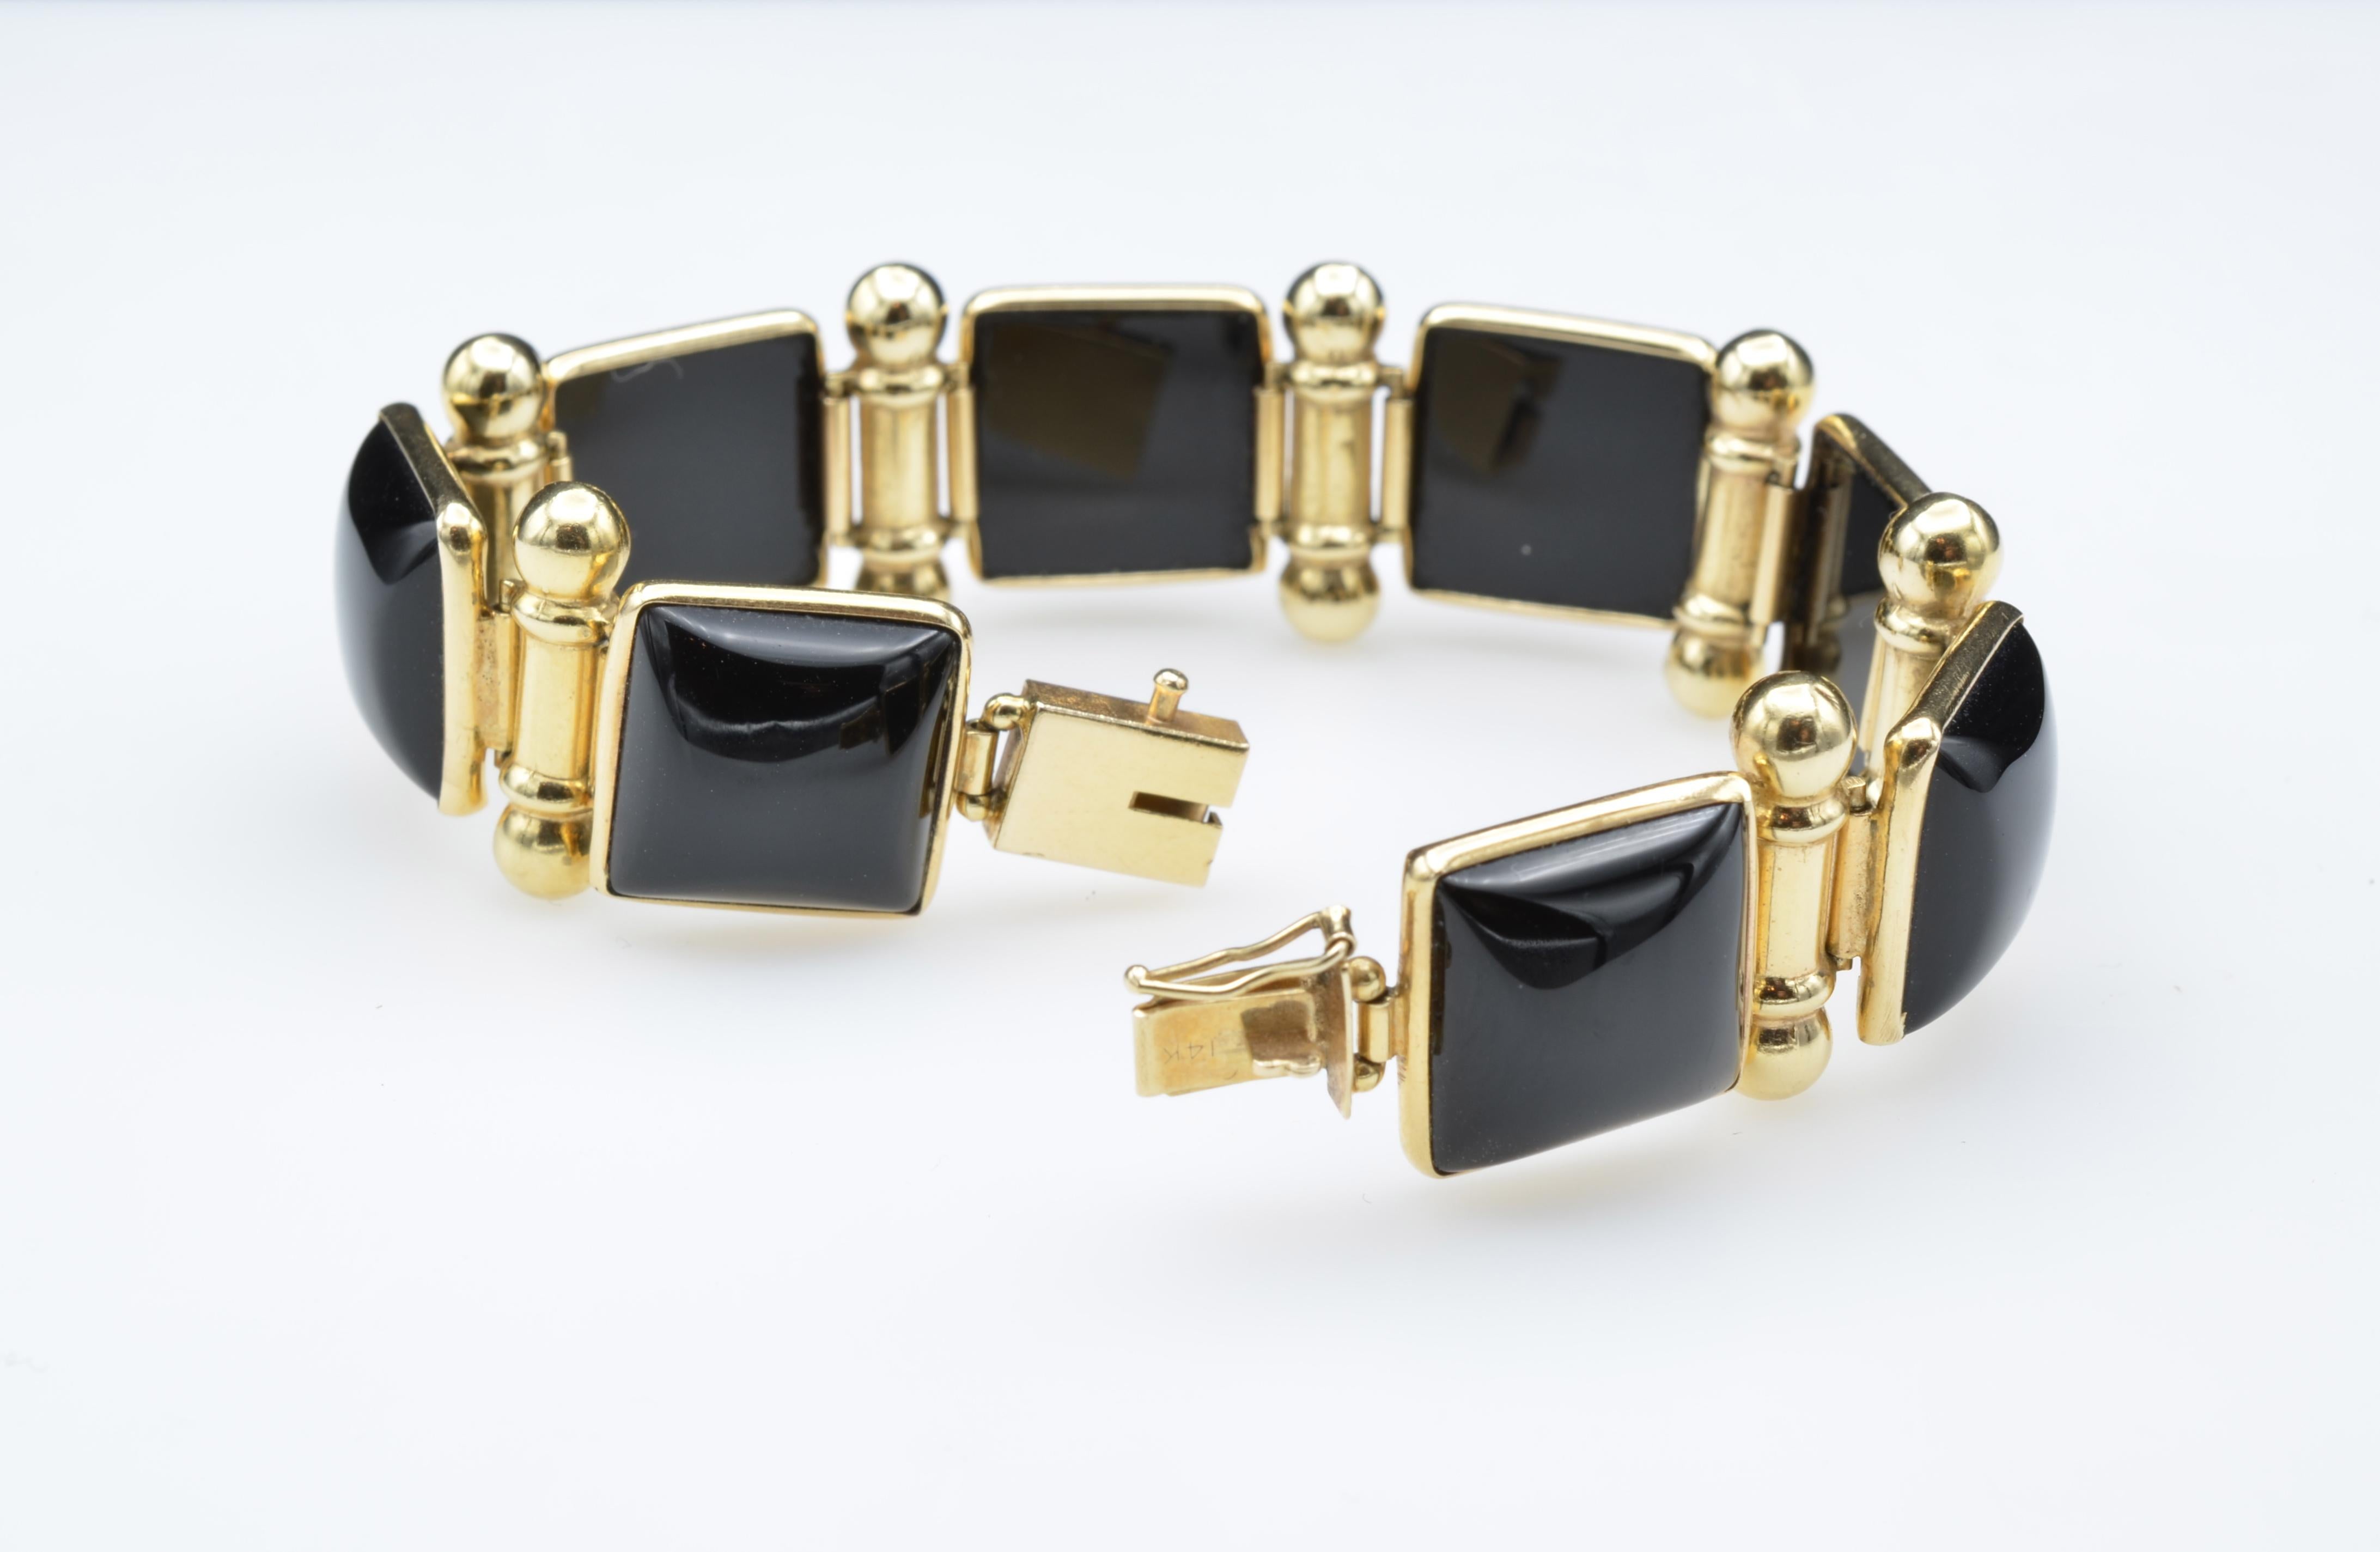 This link bracelet is modern and sleek. Squares of black onyx are framed in 14k with scroll hinges. Reminiscent of Grace Kelly in 